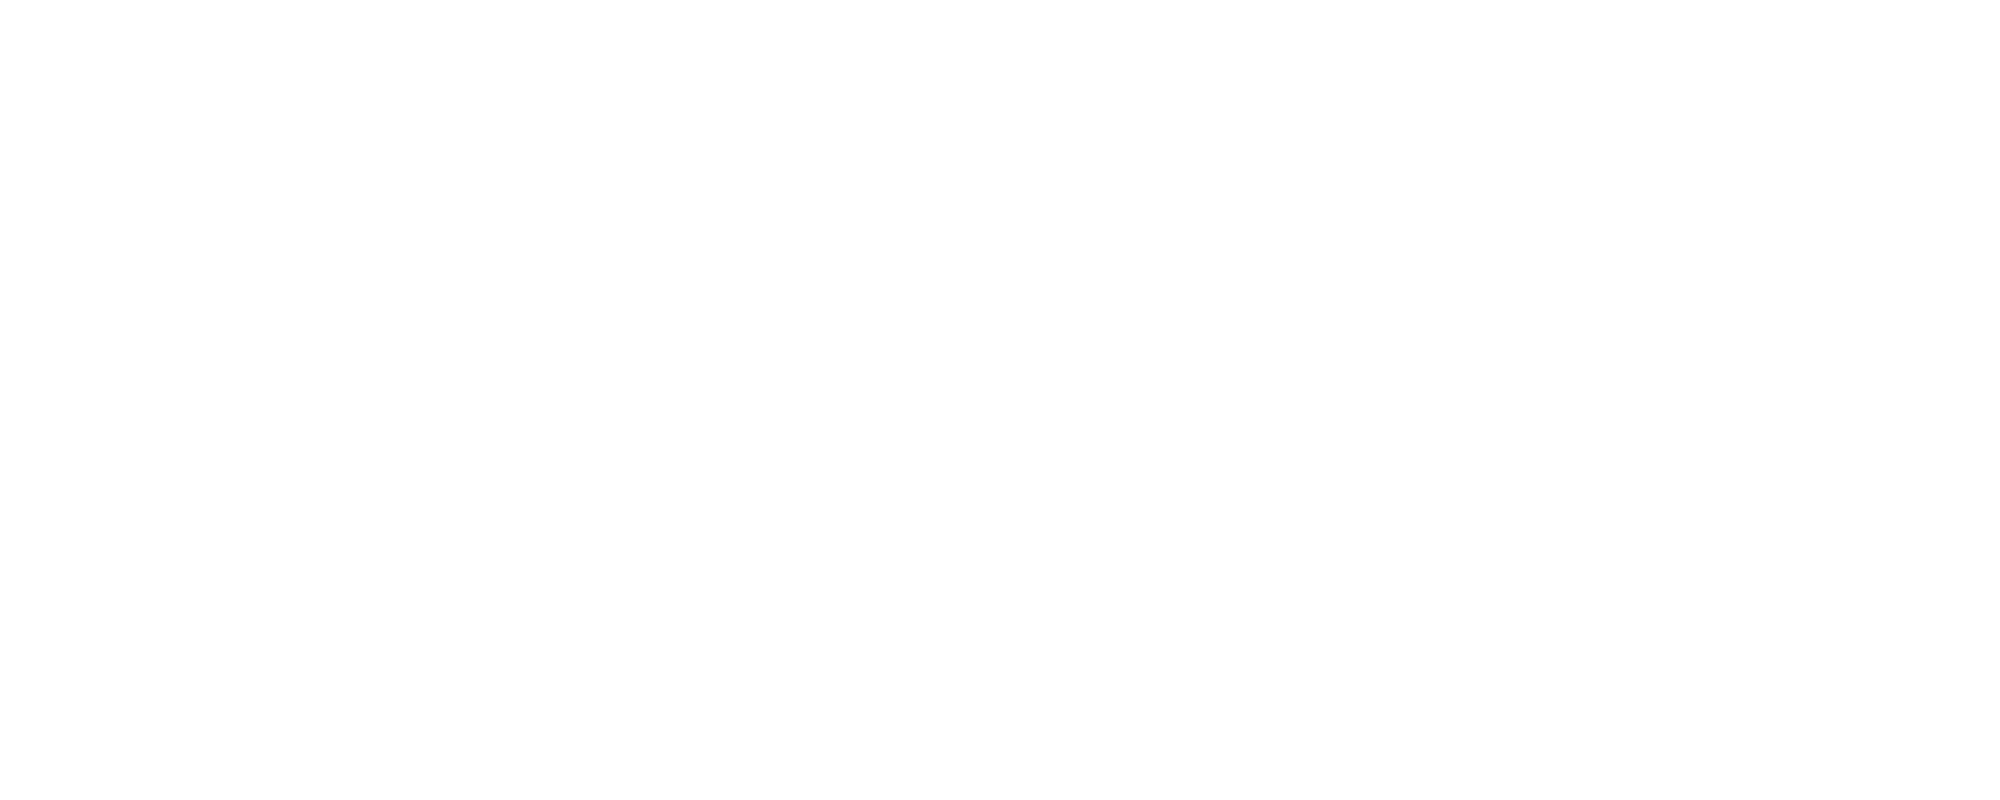 SPECTRUM PARTNERS WITH OVATION TV TO PRESENT $15,000 STAND FOR THE ARTS AWARD TO SOUNDBITES FOUNDATION INC.